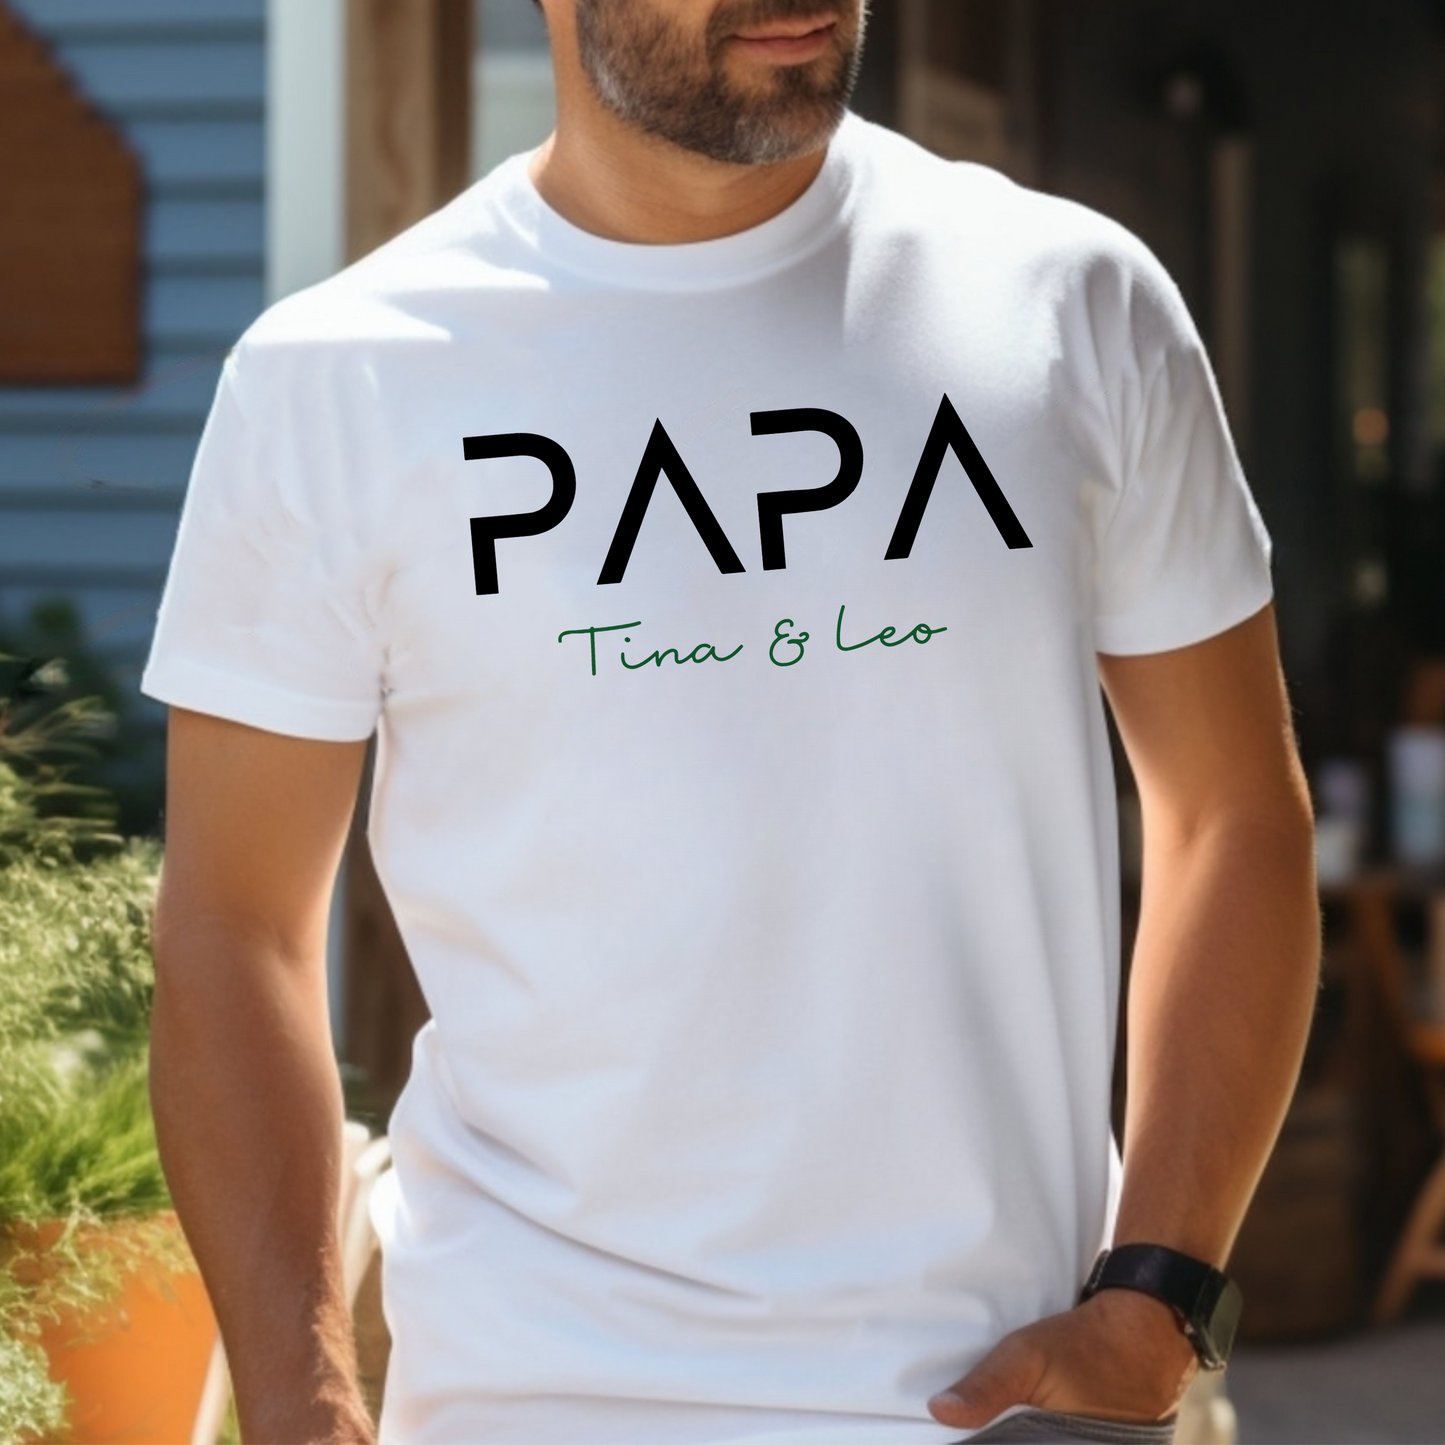 Custom Dad Shirt – Personalized with Children’s Names for Everyday Pride